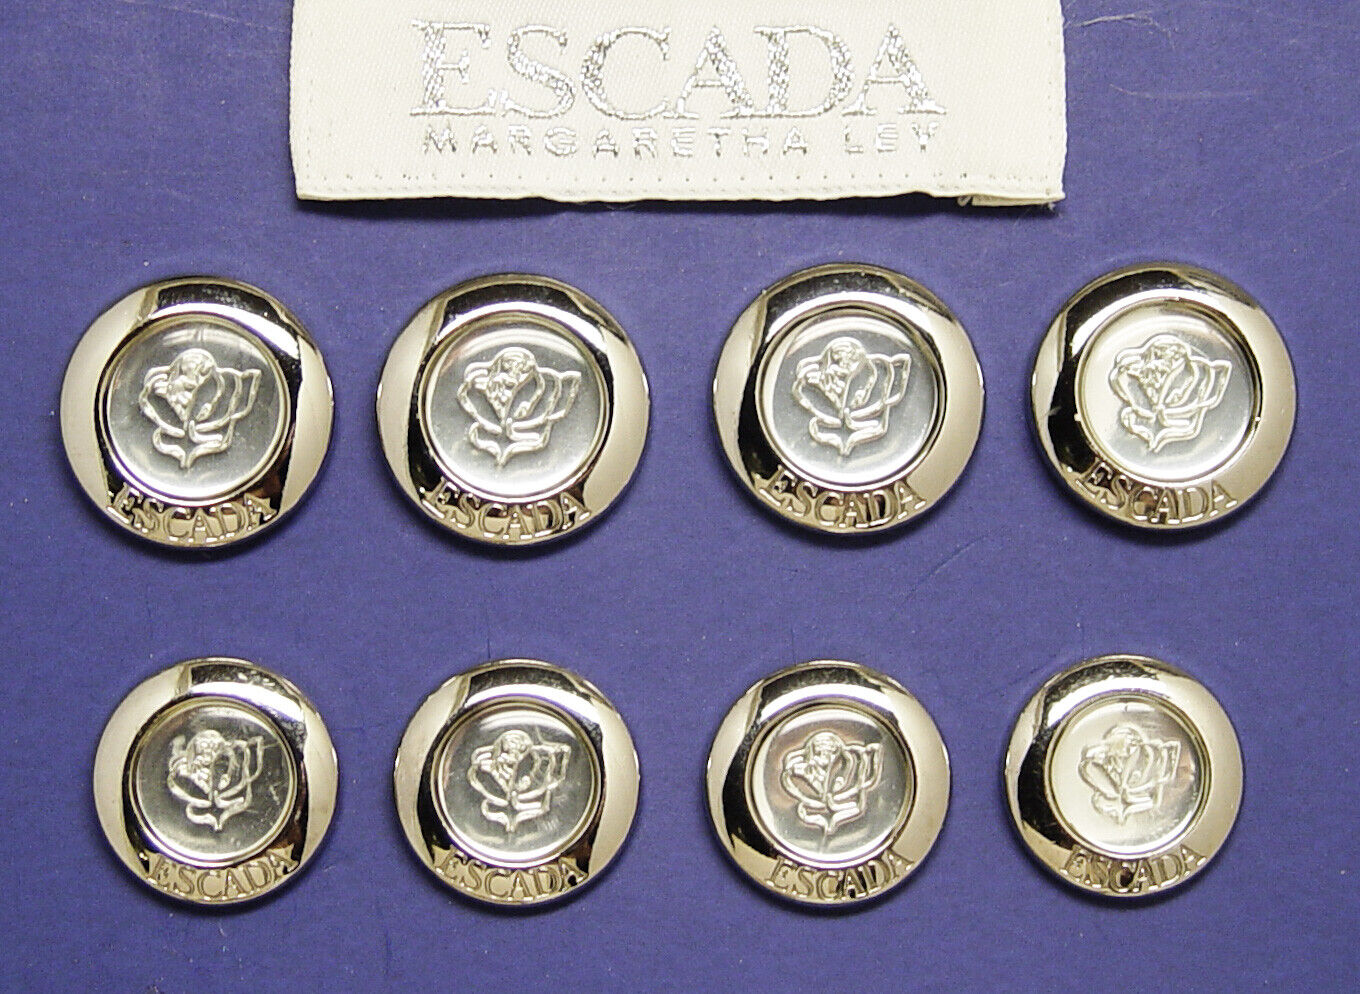 8 ESCADA Silver Tone Metal & Acrylic Rose Insert Replacement Buttons Good Cond.